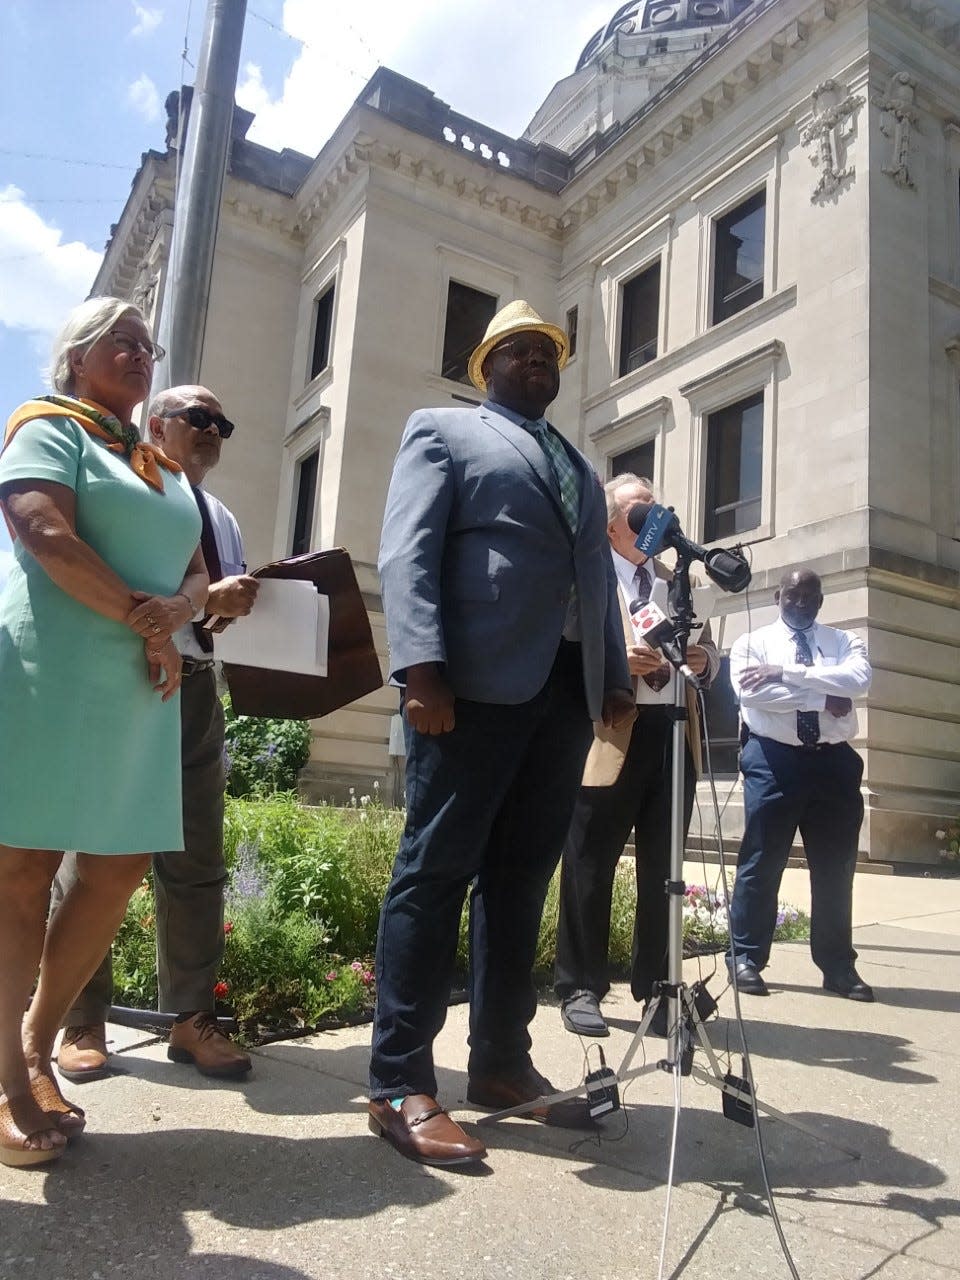 Katharine Liell and Vauhxx Booker address a small group of people during a press conference Aug. 2 at the Monroe County Courthouse.